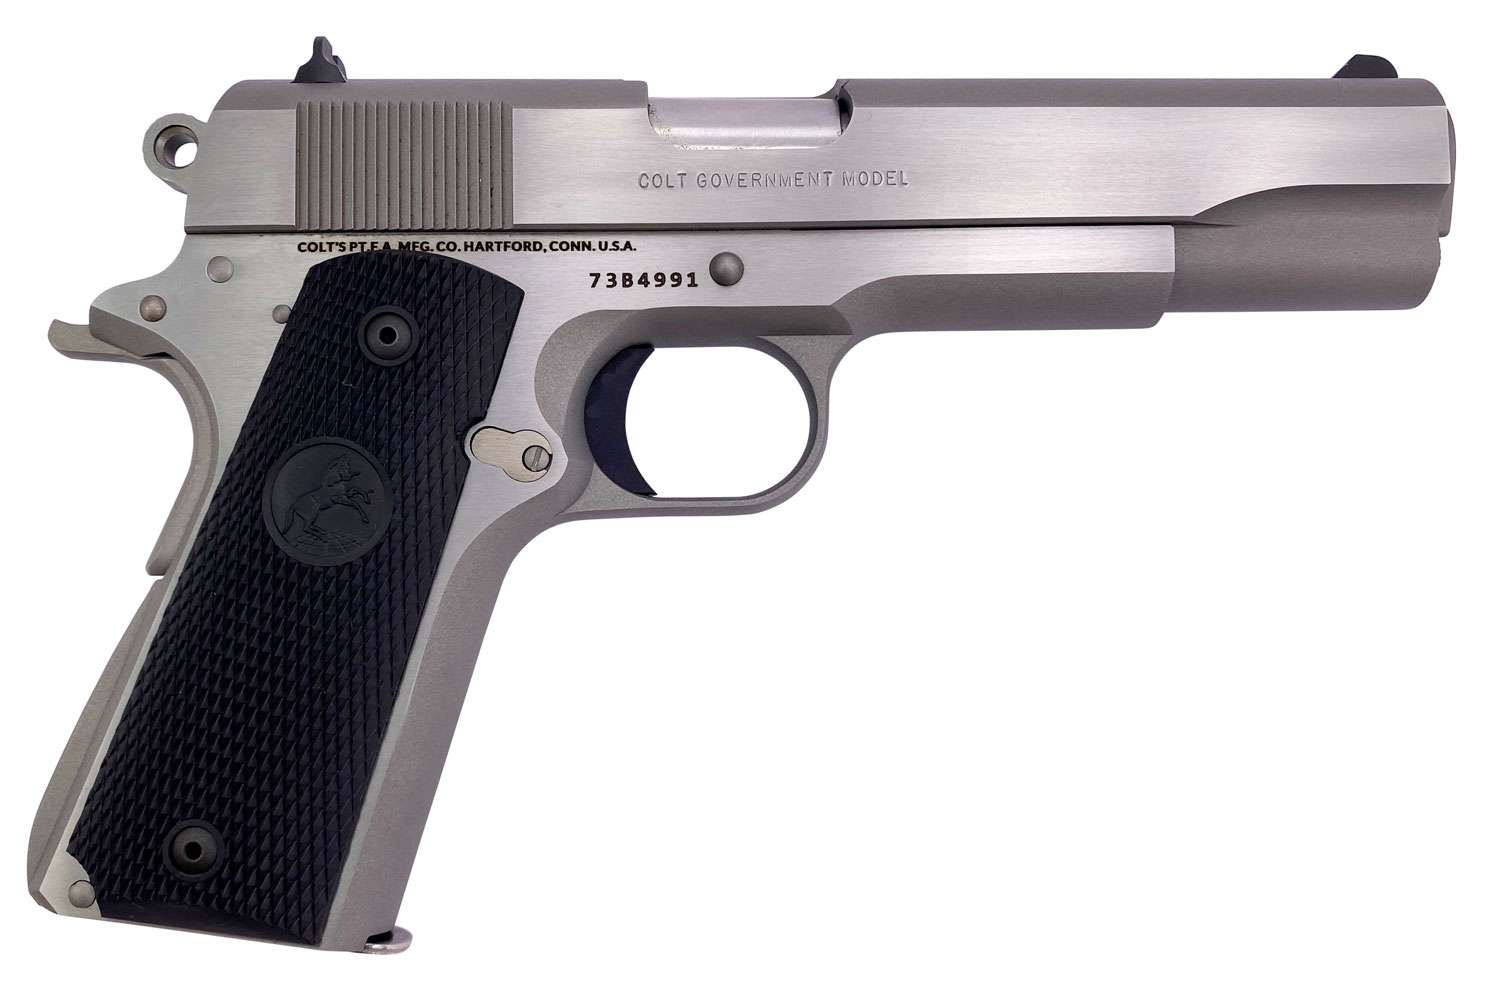 Compensador angel acero inoxidable Stainless culatazos bushing 1911 a1 Colt .45 